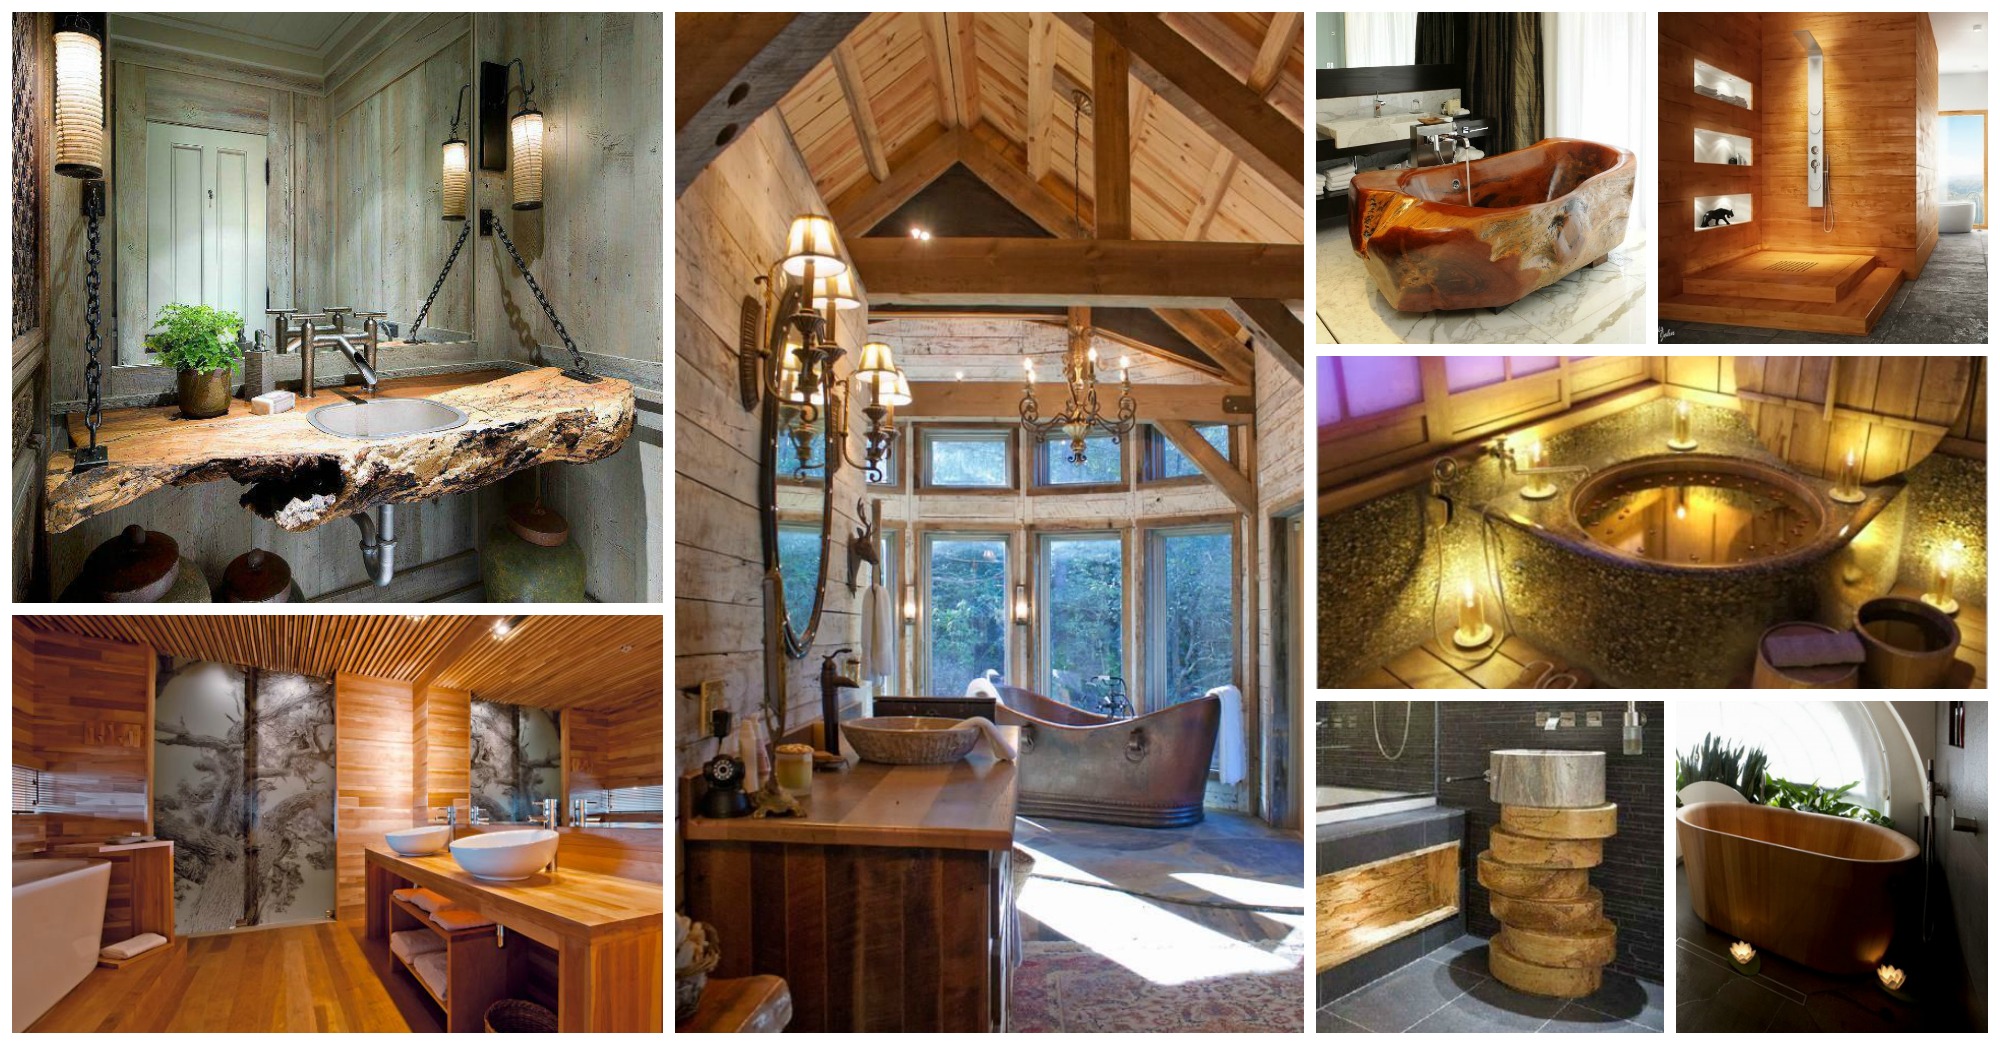 The Most Amazing Wooden Bathroom Ideas That Will Catch 